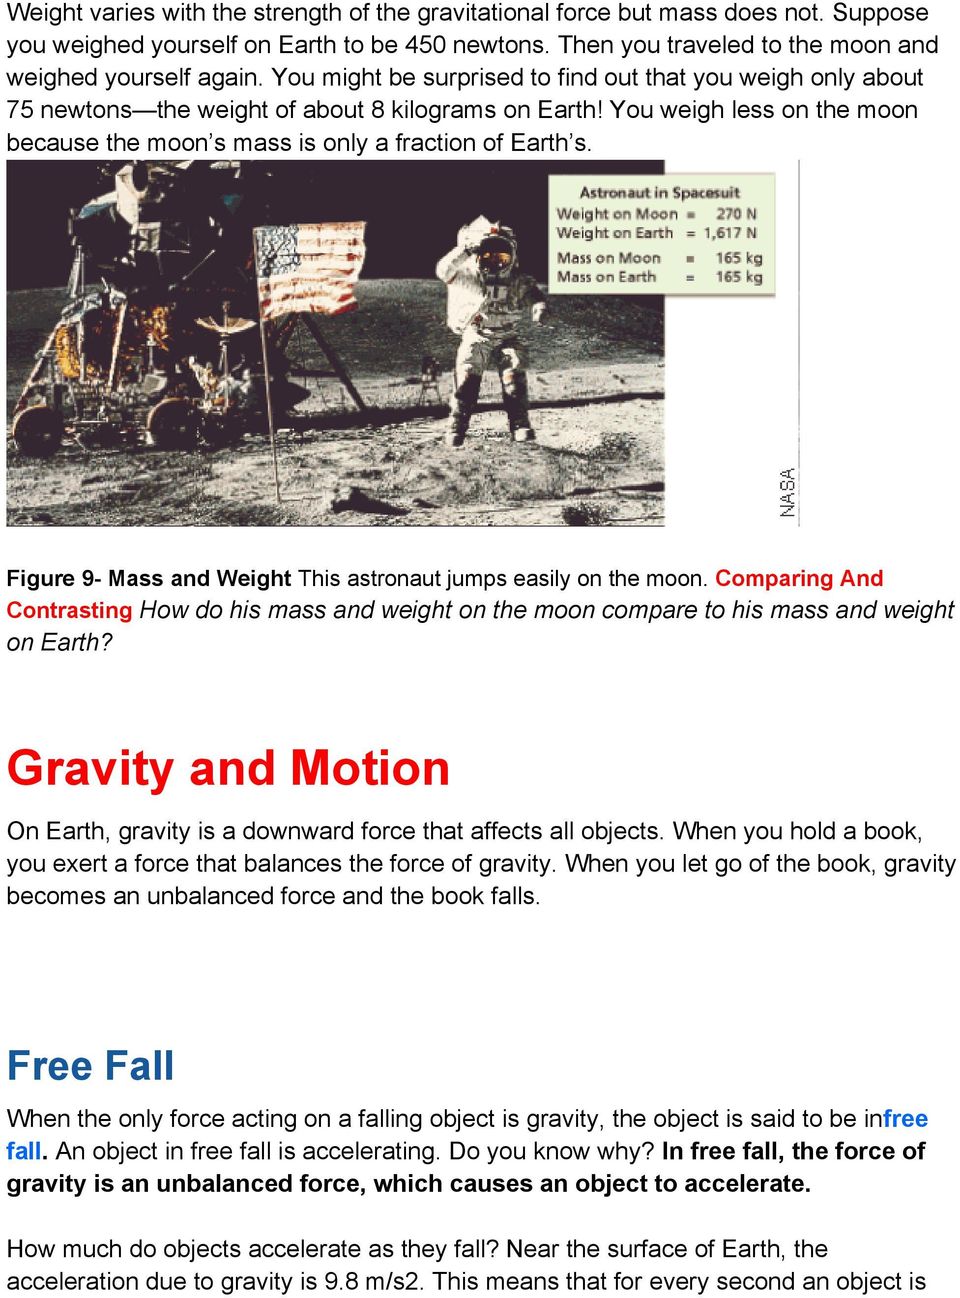 Figure 9- Mass and Weight This astronaut jumps easily on the moon. Comparing And Contrasting How do his mass and weight on the moon compare to his mass and weight on Earth?